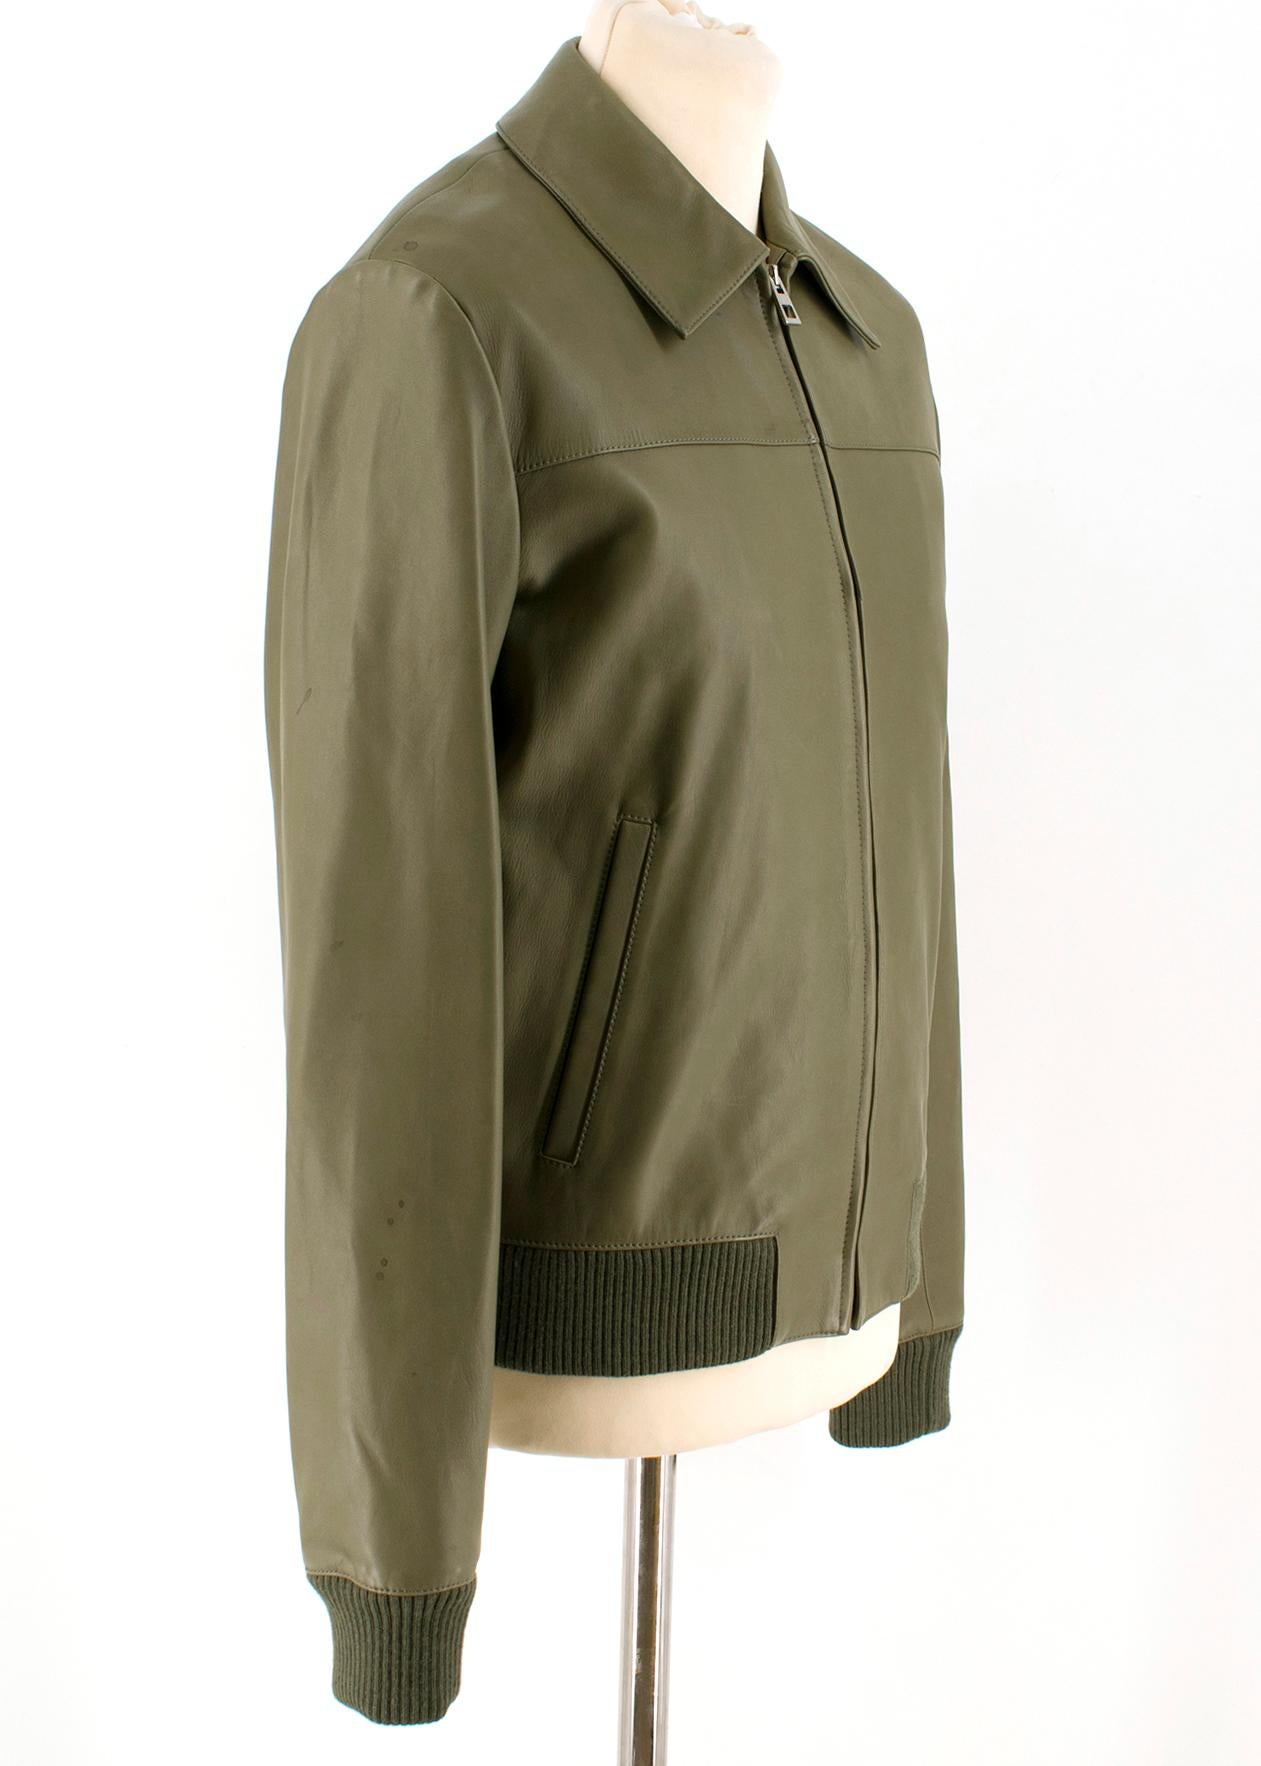 Loewe Men's Khaki Soft Leather Jacket

-Green leather jacket with  
-Ribbed wool hem,
-Collared 
-Zip fasten
-Two exterior pockets 
-Two interior pockets
-Wool ribbed cuffs
-Cotton interior lining 

Please note, these items are pre-owned and may